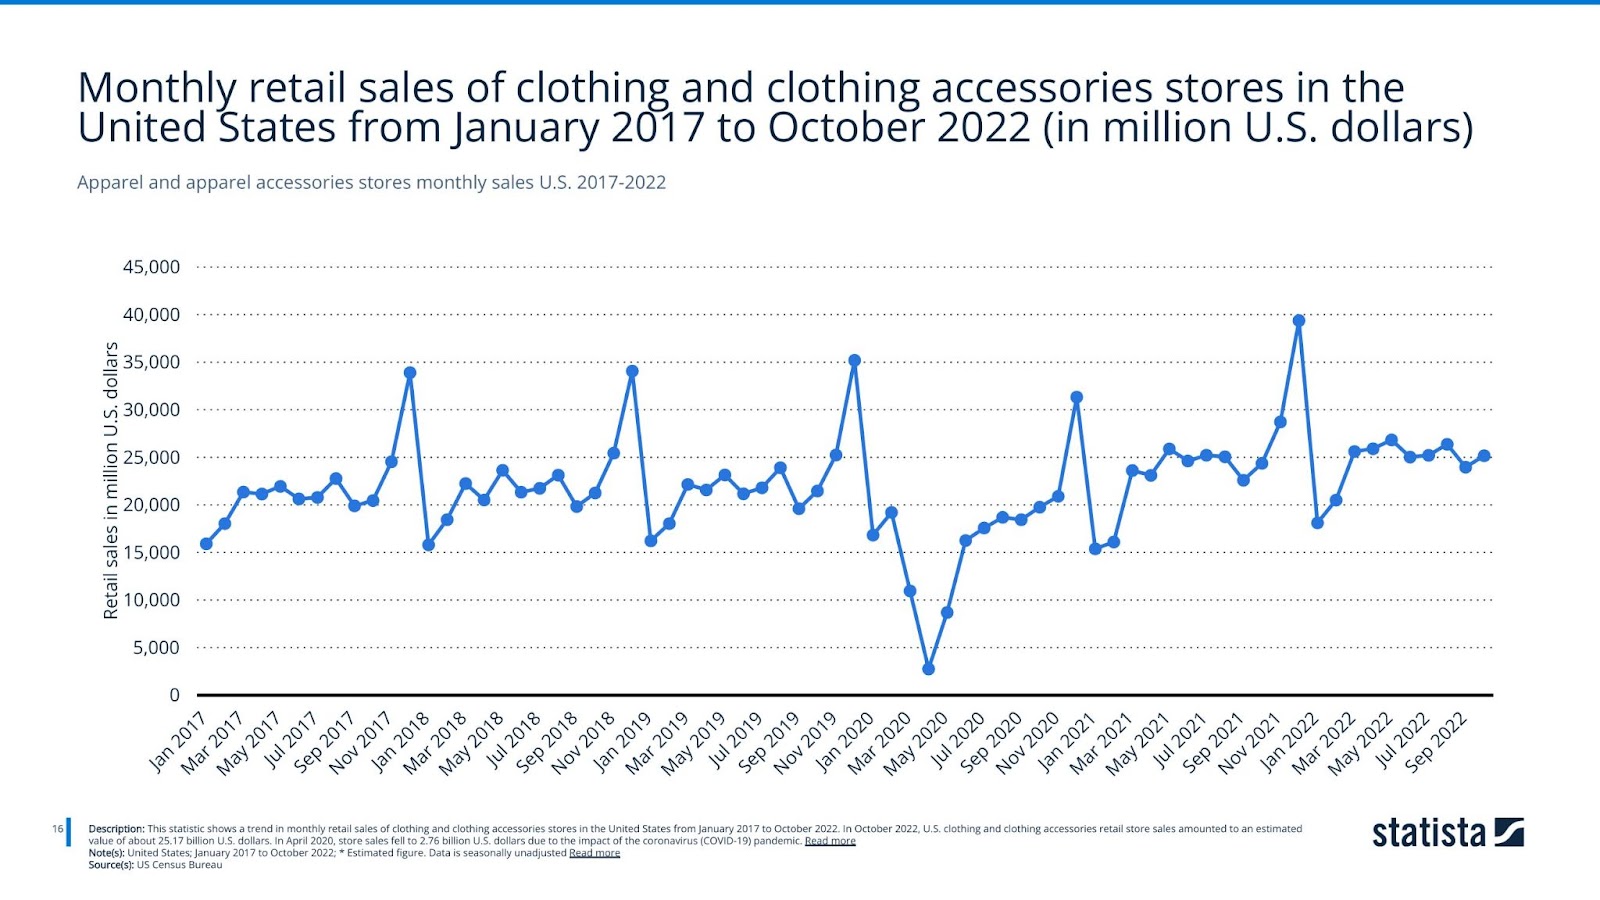 Apparel and apparel accessories stores monthly sales U.S. 2017-2022